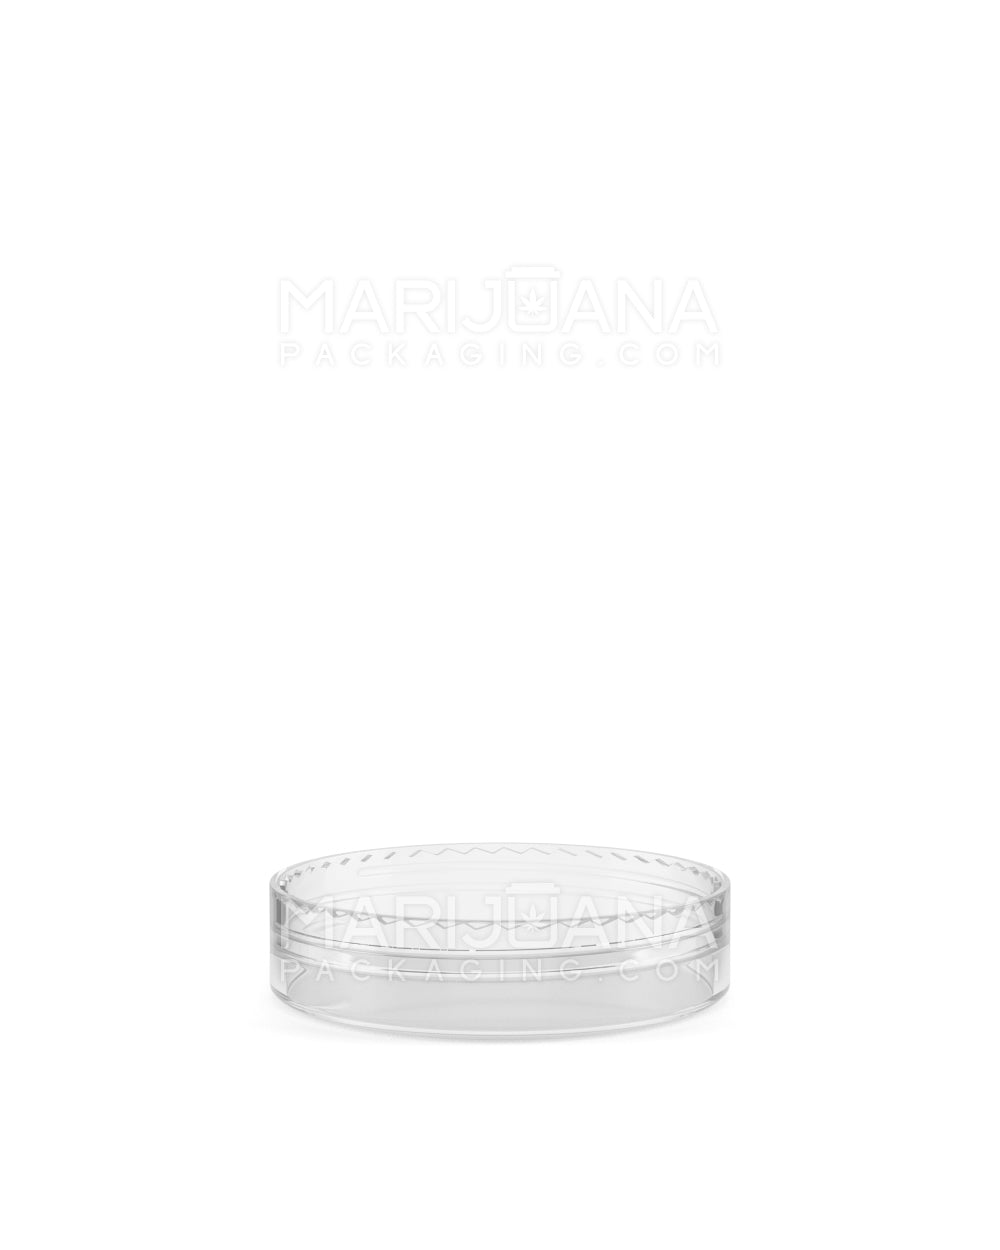 Clear Concentrate Containers w/ Screw Top Cap | 15mL - Plastic - 200 Count - 11